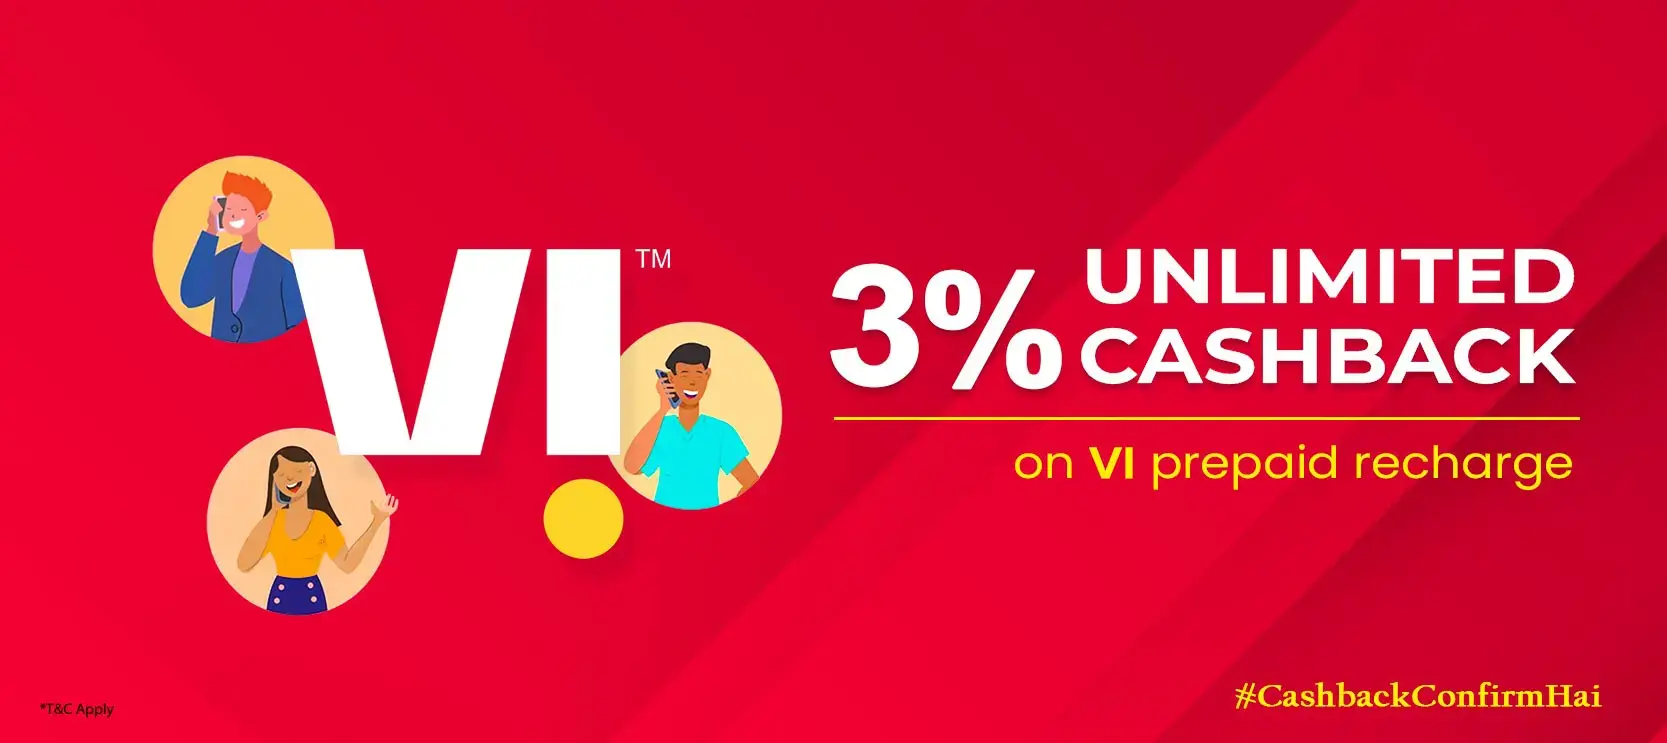 Get UNLIMITED <b>3%</b> CASHBACK on VI Prepaid Recharges.